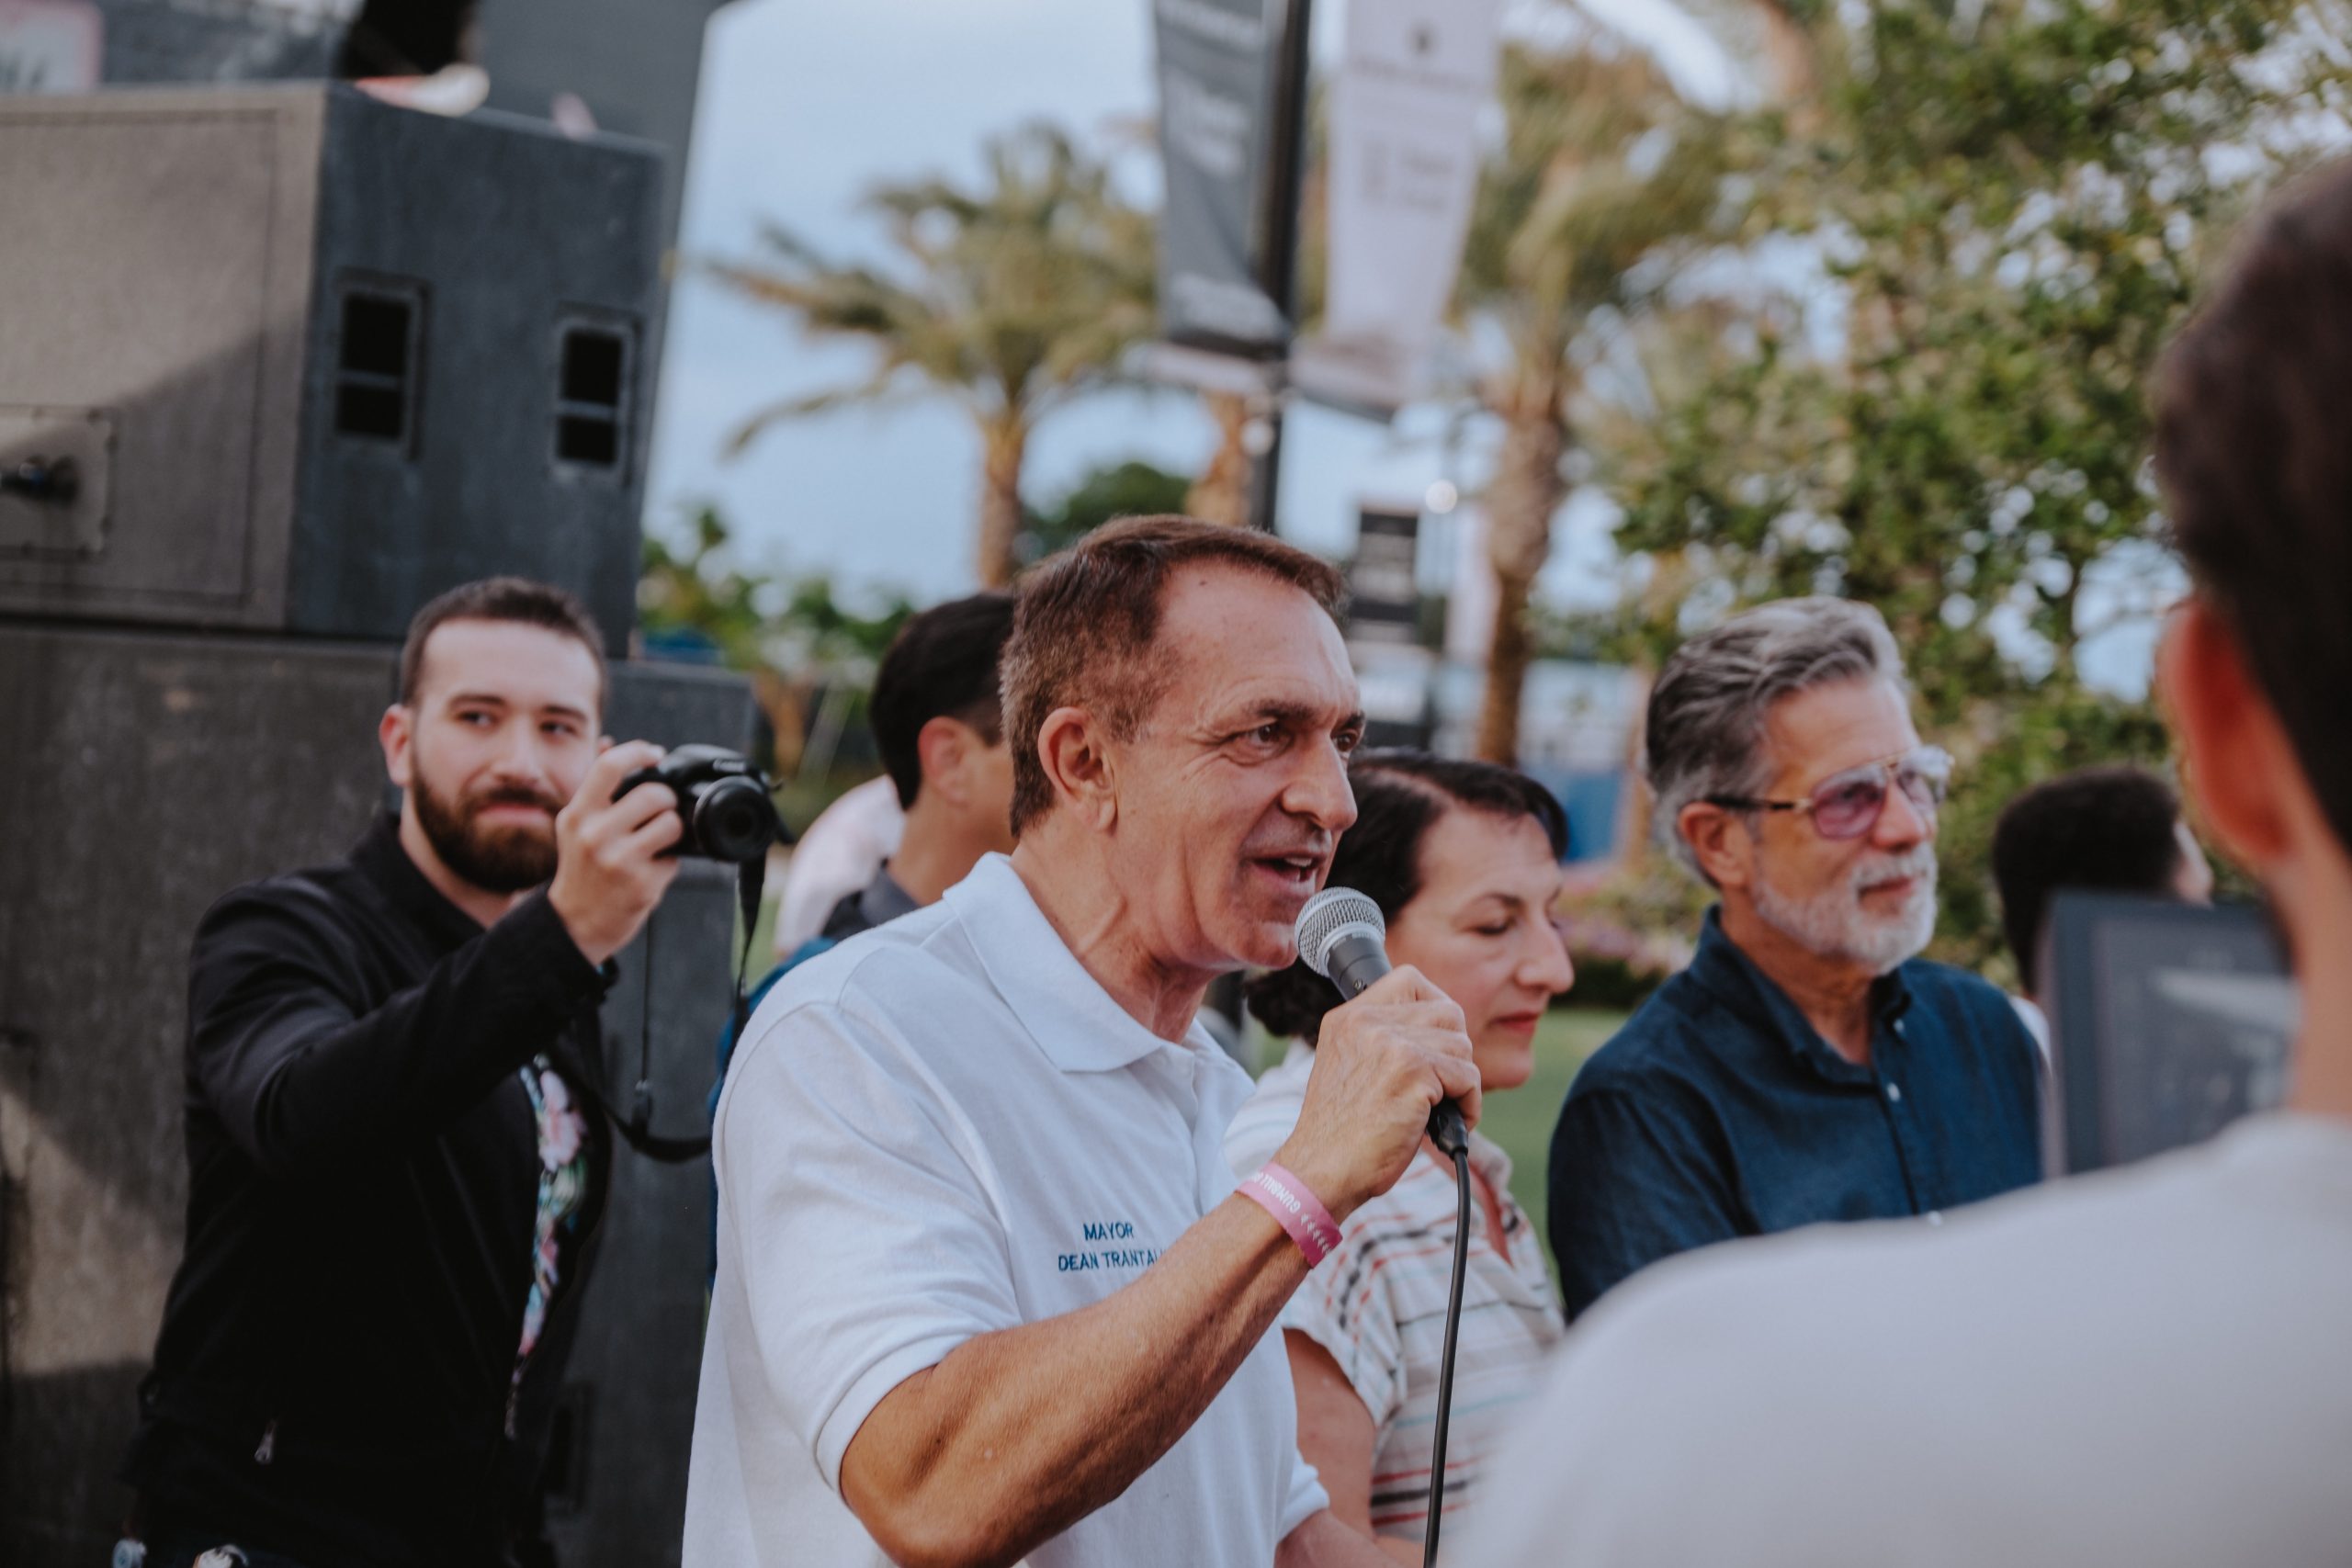 Mayor of Fort Lauderdale at Gumball 3000